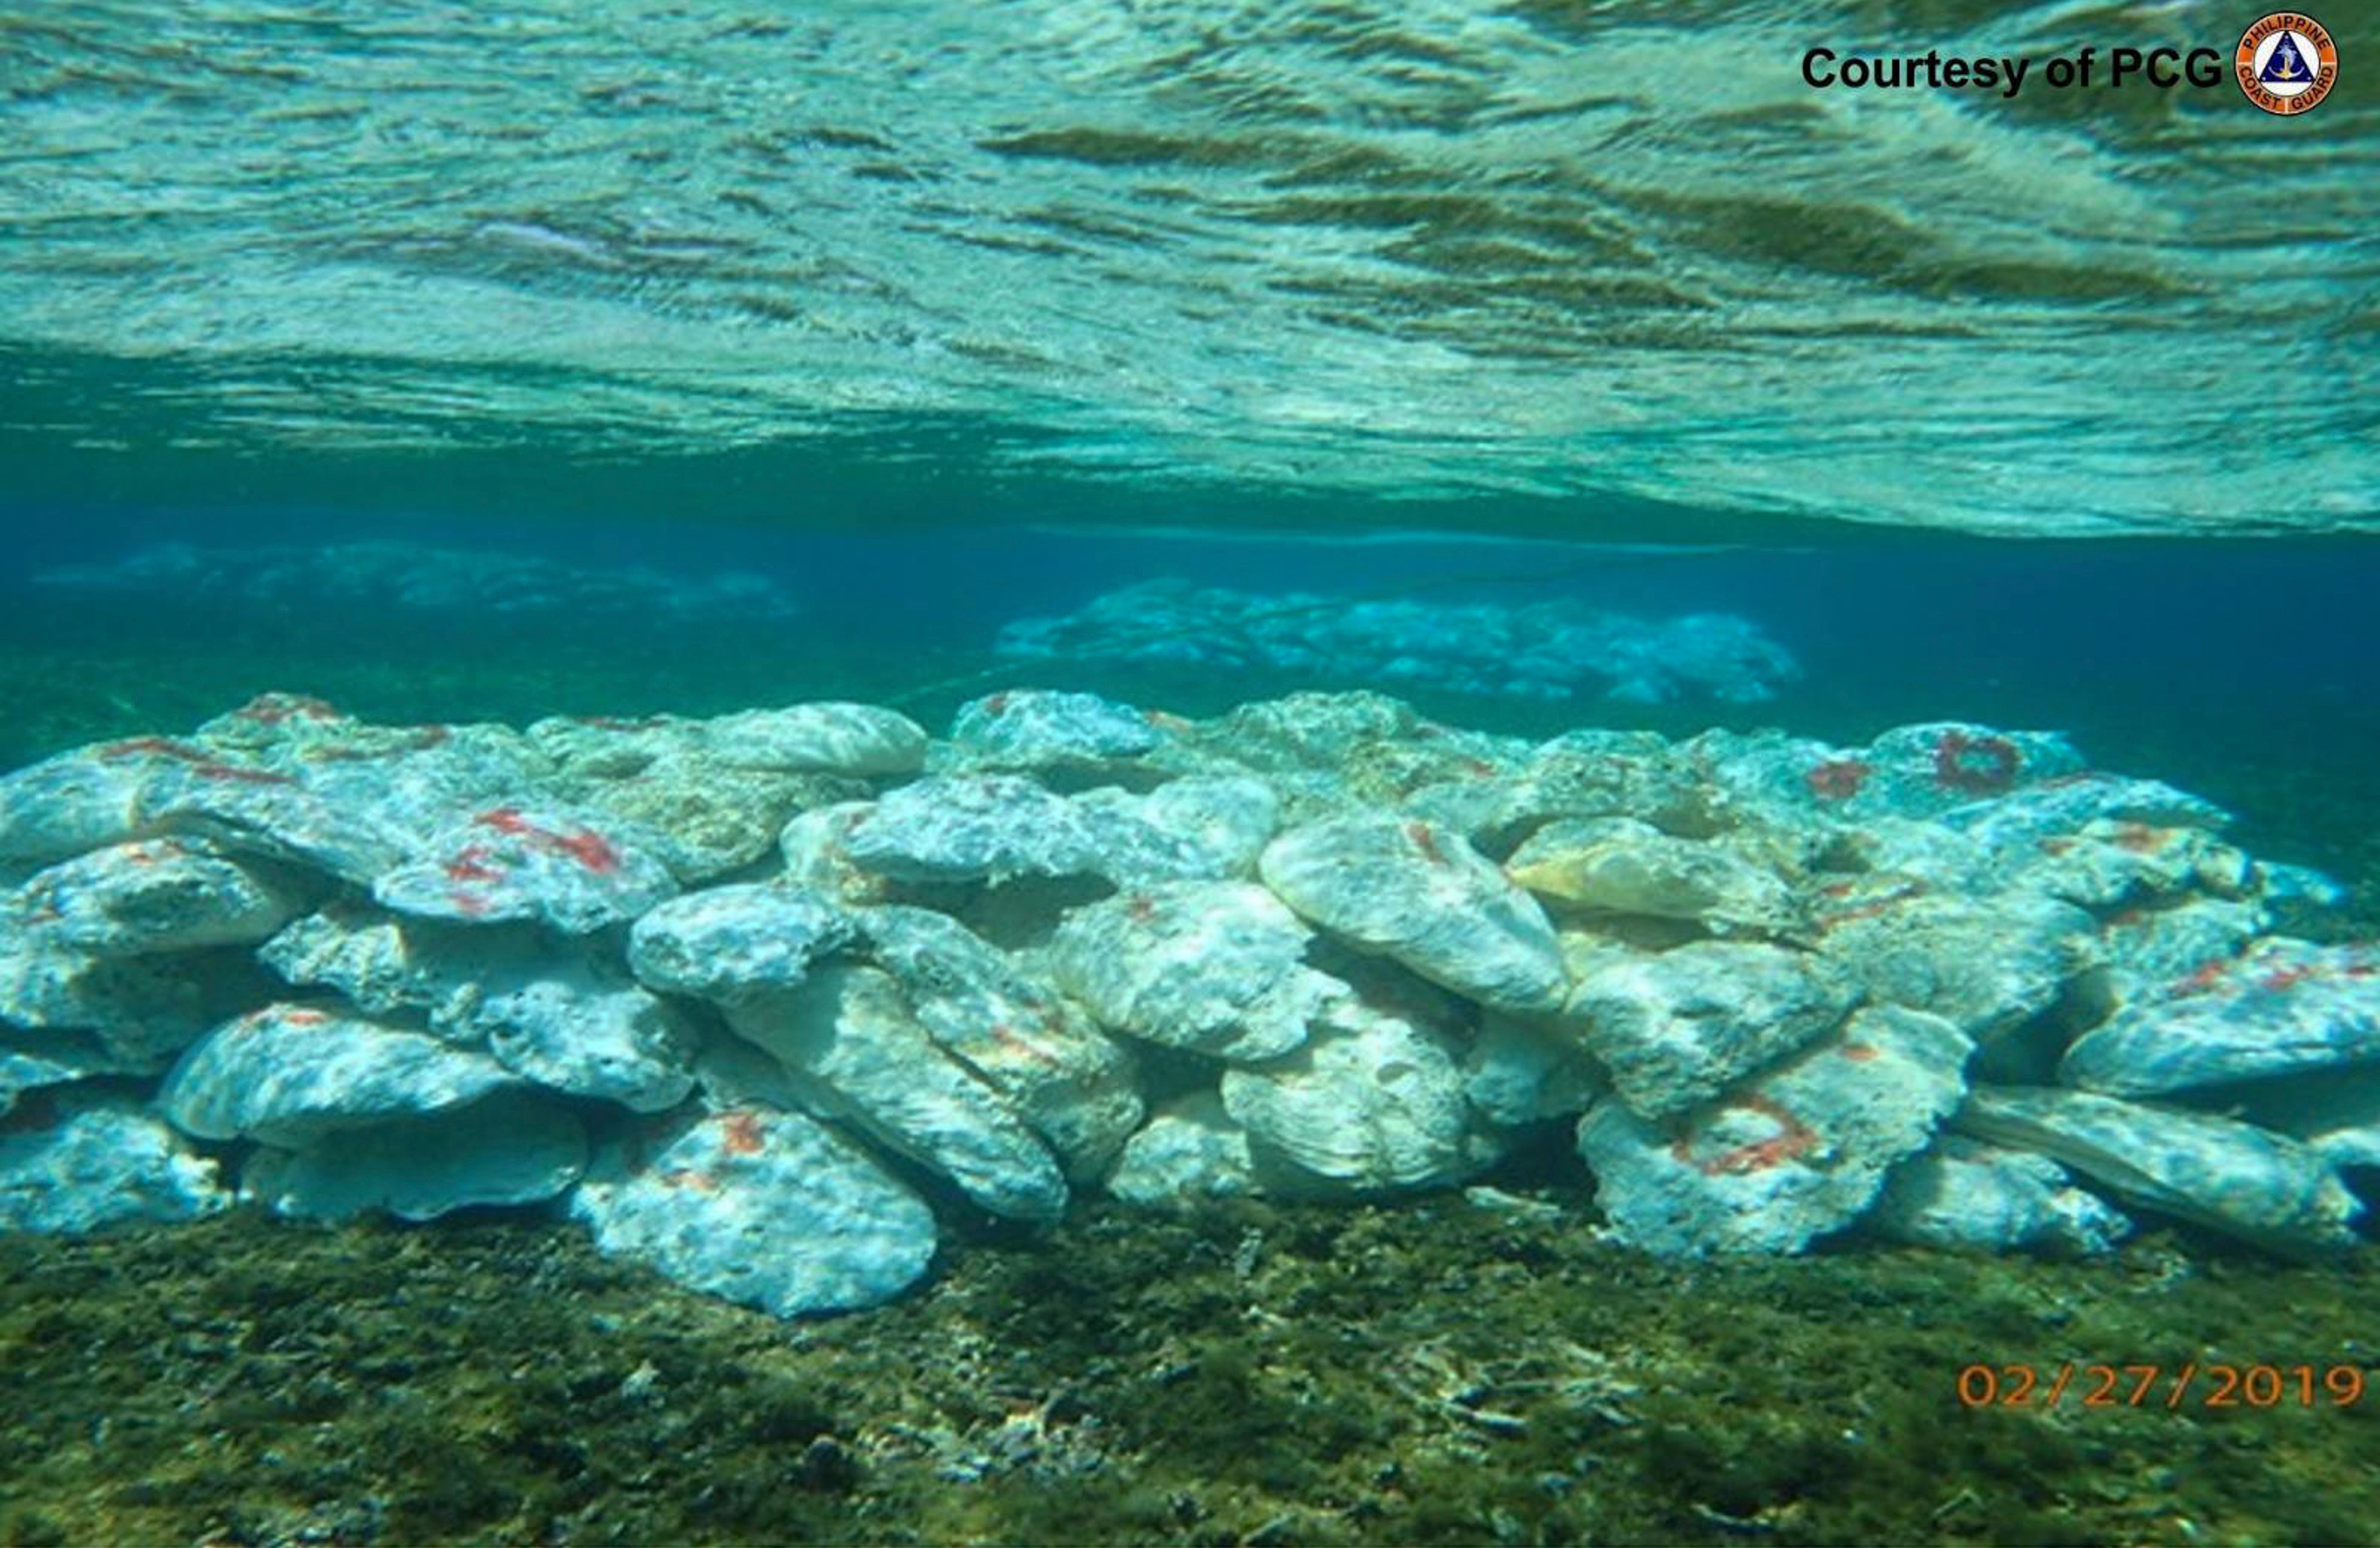 This February 27, 2019 handout photo provided by the Philippine Coast Guard shows marked giant clams in several piles made by Chinese militias at the shallow part of the Scarborough shoal, at the disputed South China Sea, the Philippine Coast Guard said